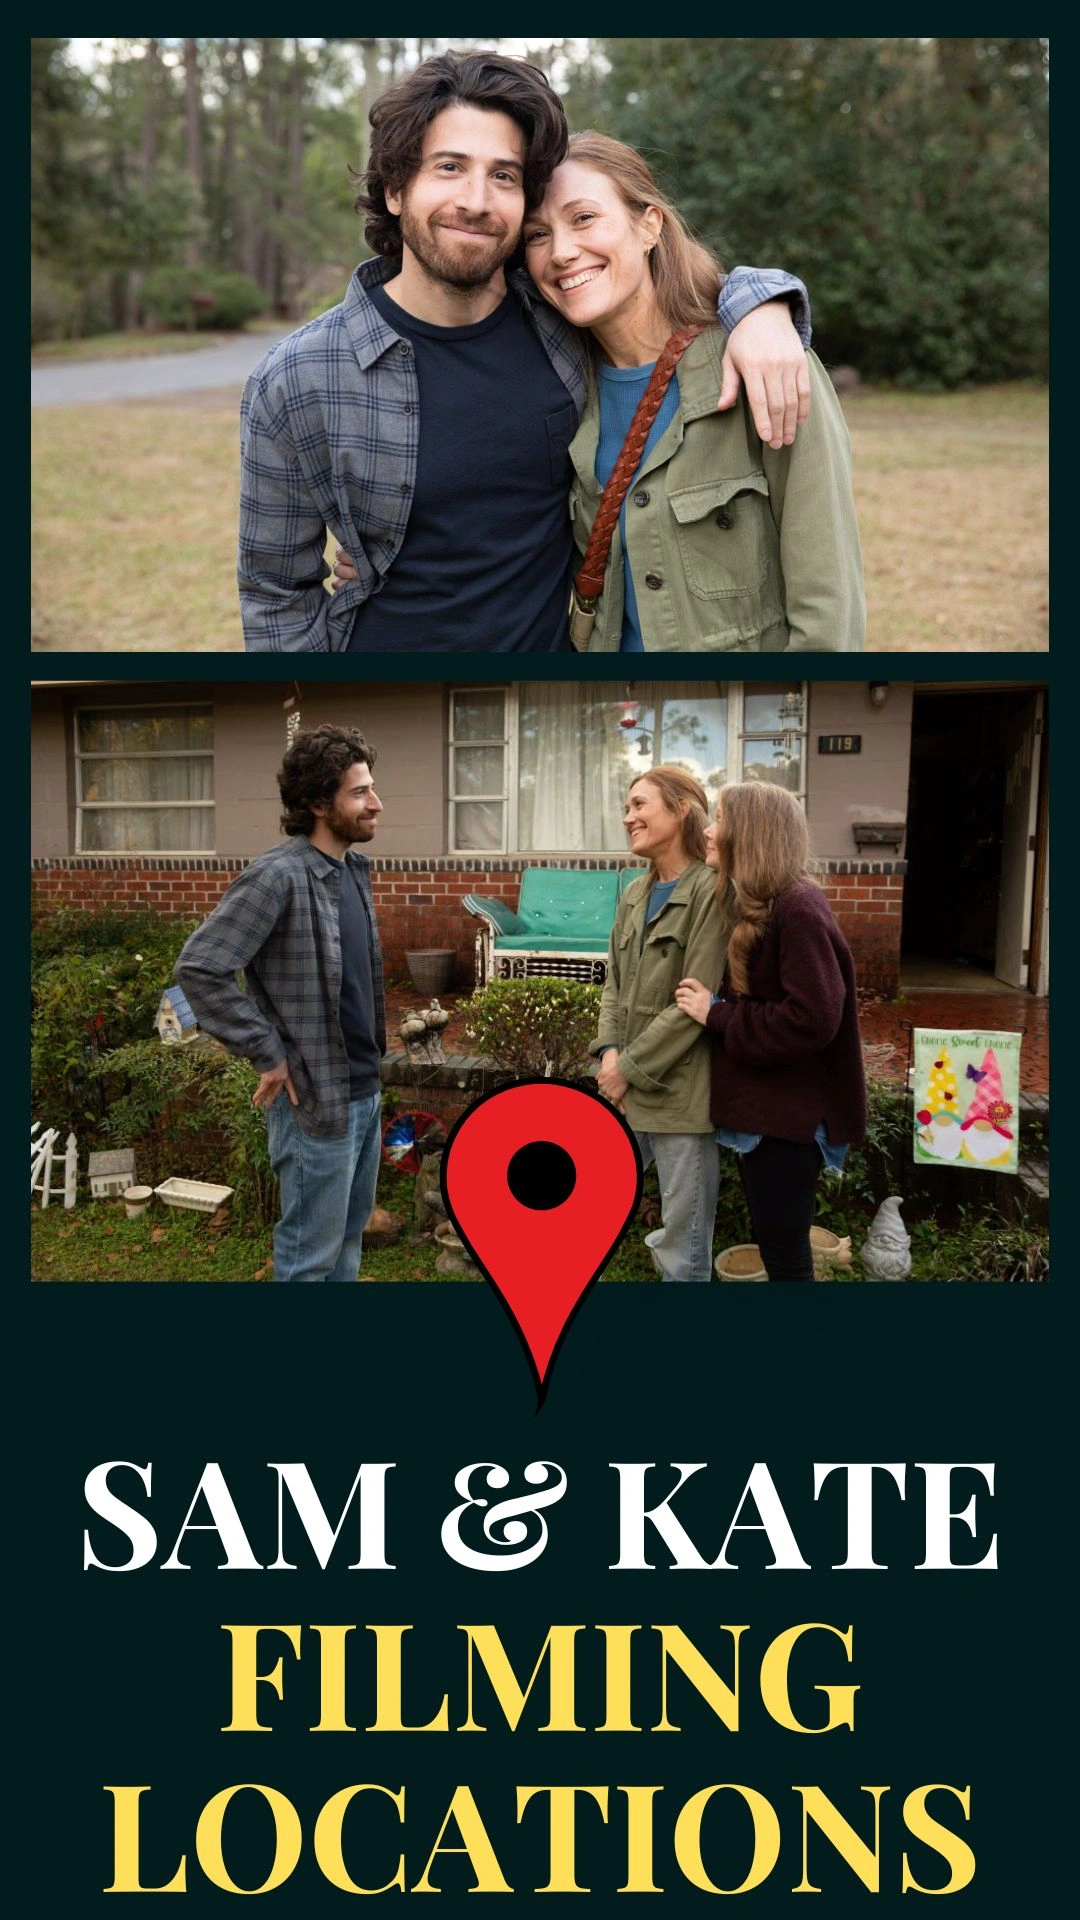 Sam & Kate Filming Locations